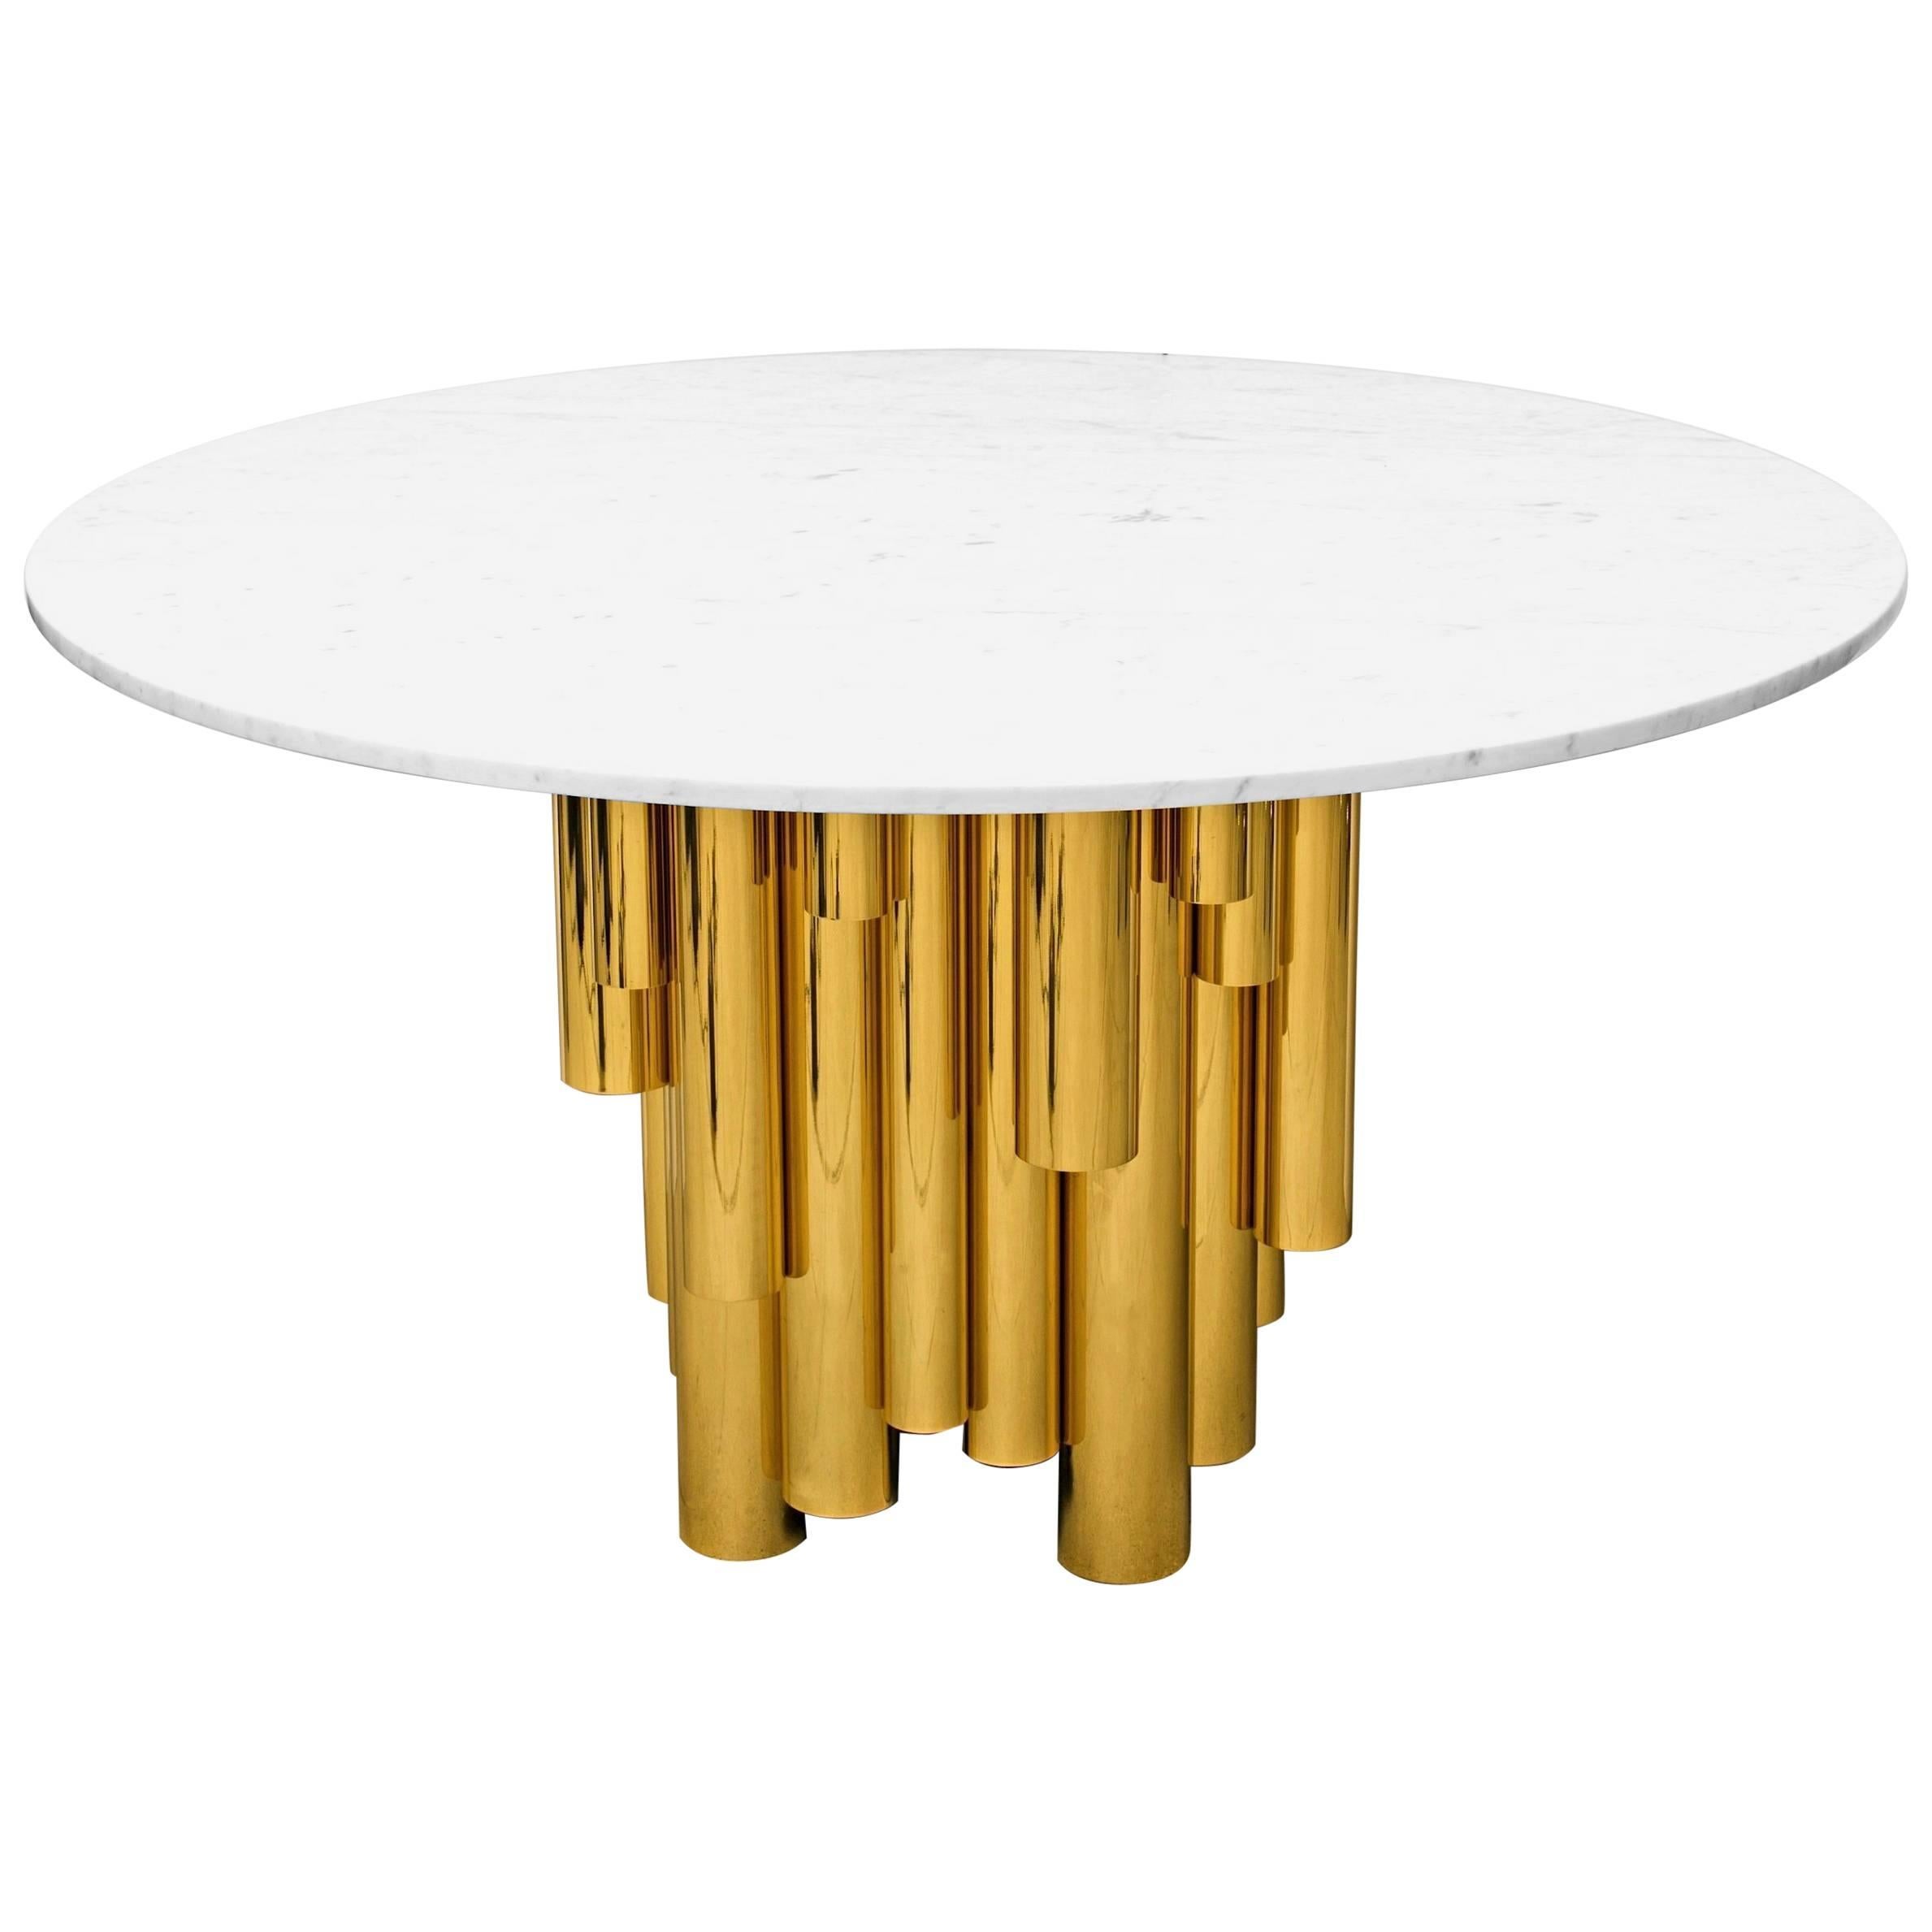 Round Brass Tubular Dining Table with Marble Top